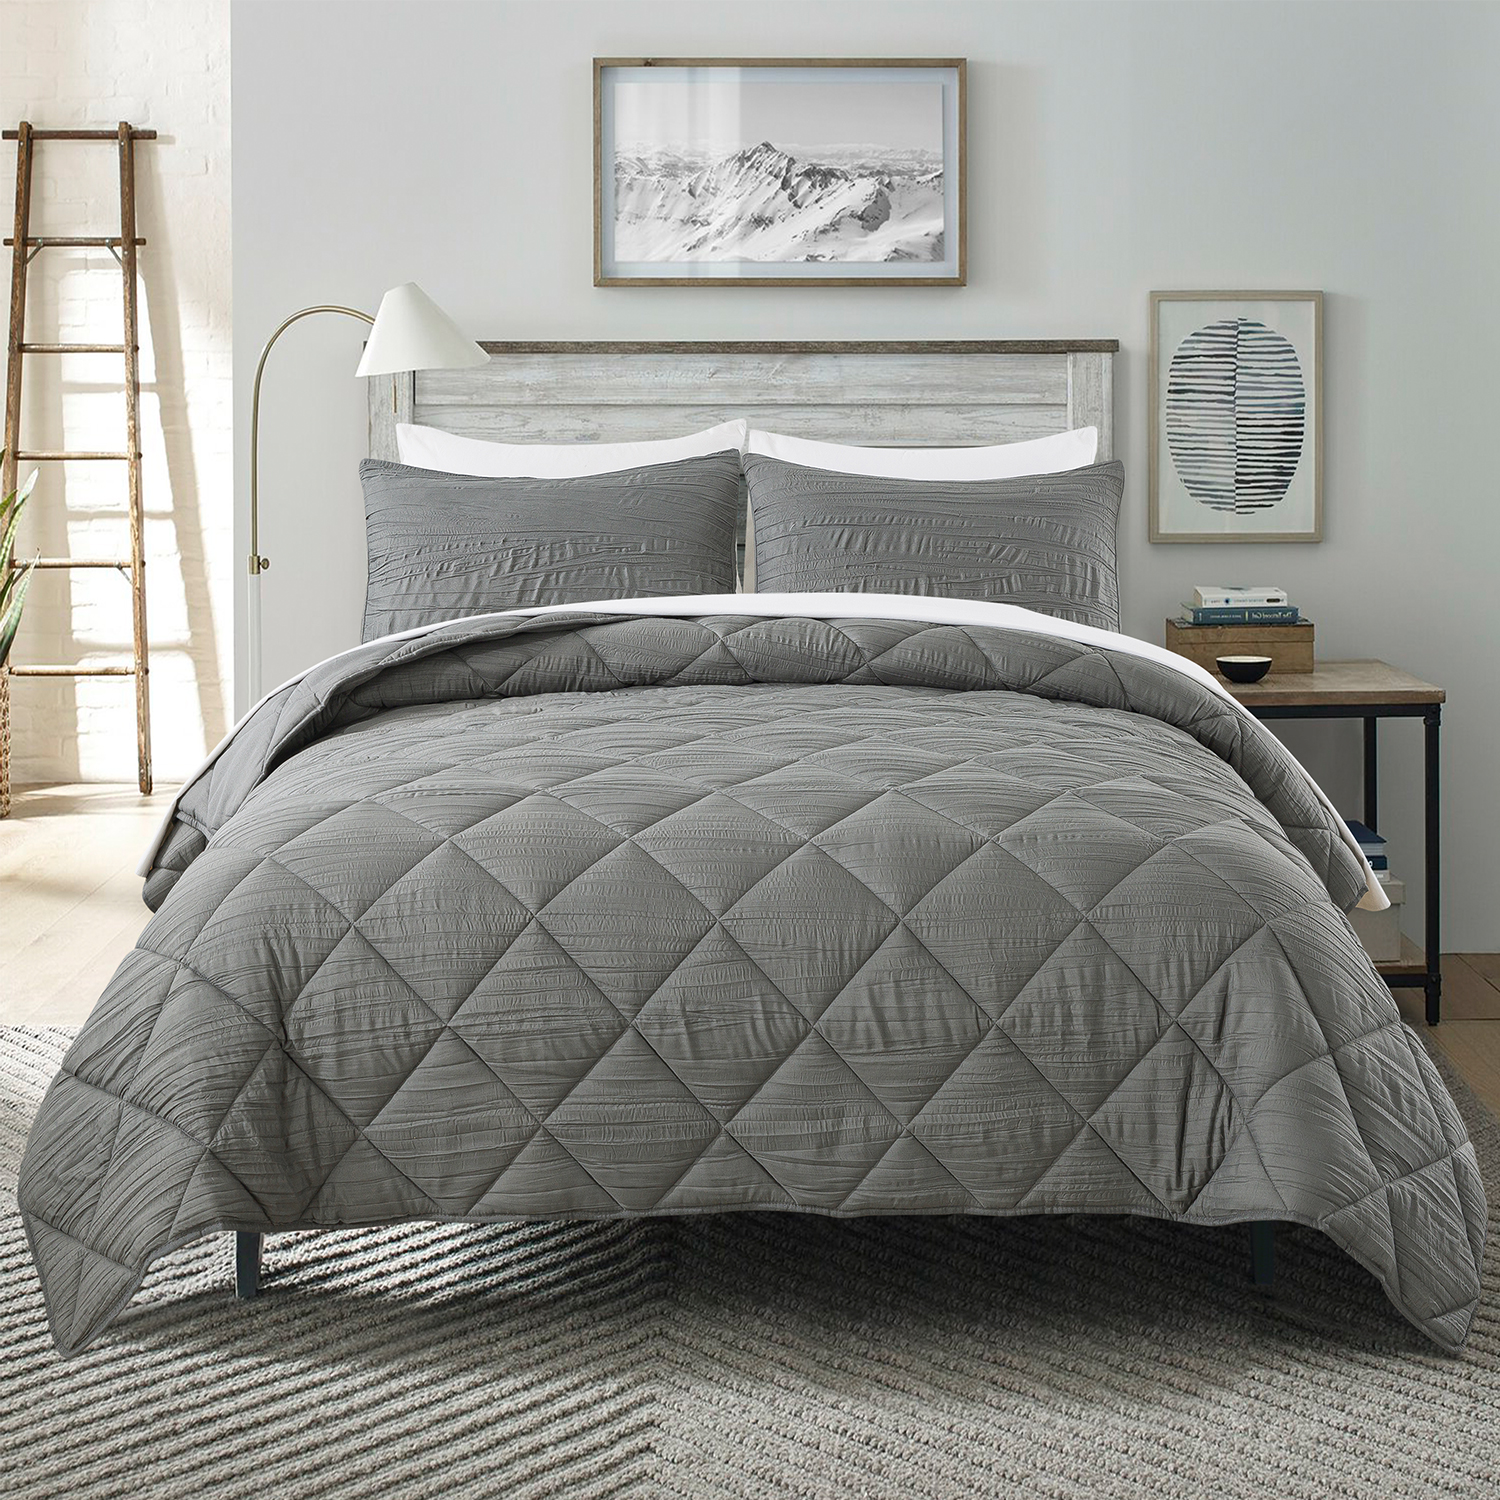 JML 2-3 Pieces Quilted Creased Square Bedding Comforter Set With Pillow Shams